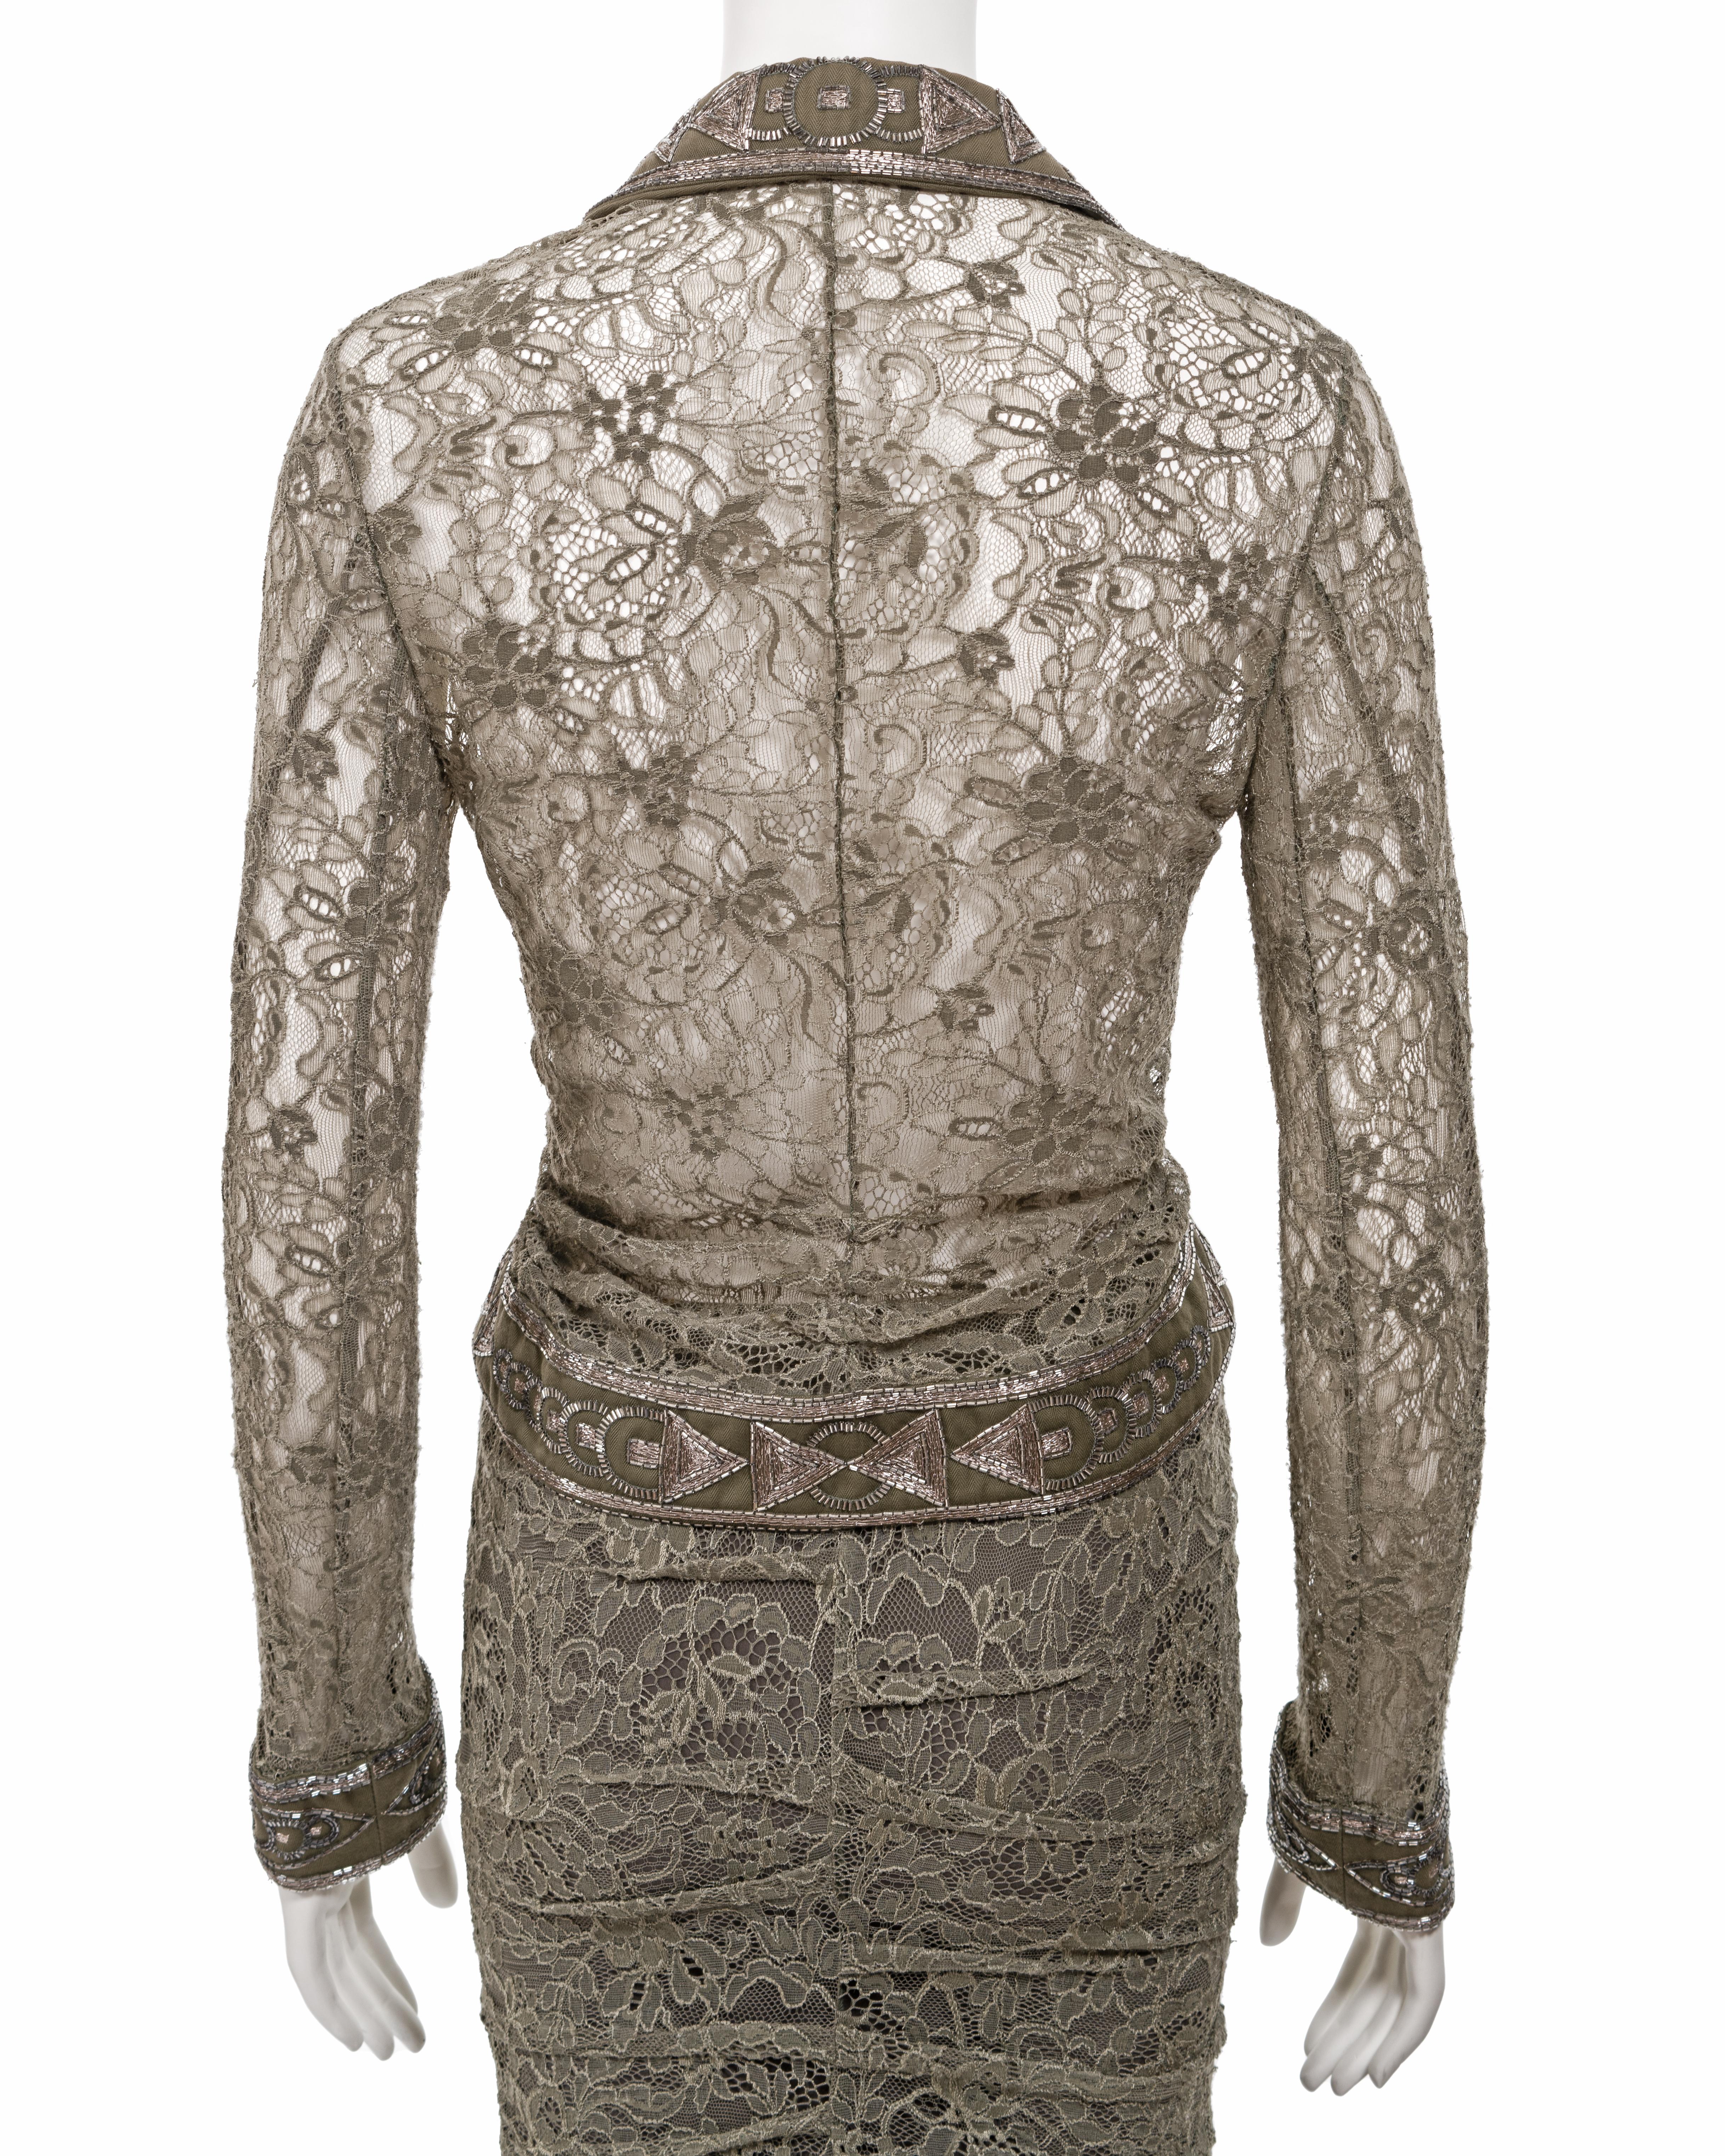 Christian Dior by John Galliano green lace beaded skirt suit, fw 2003 For Sale 6